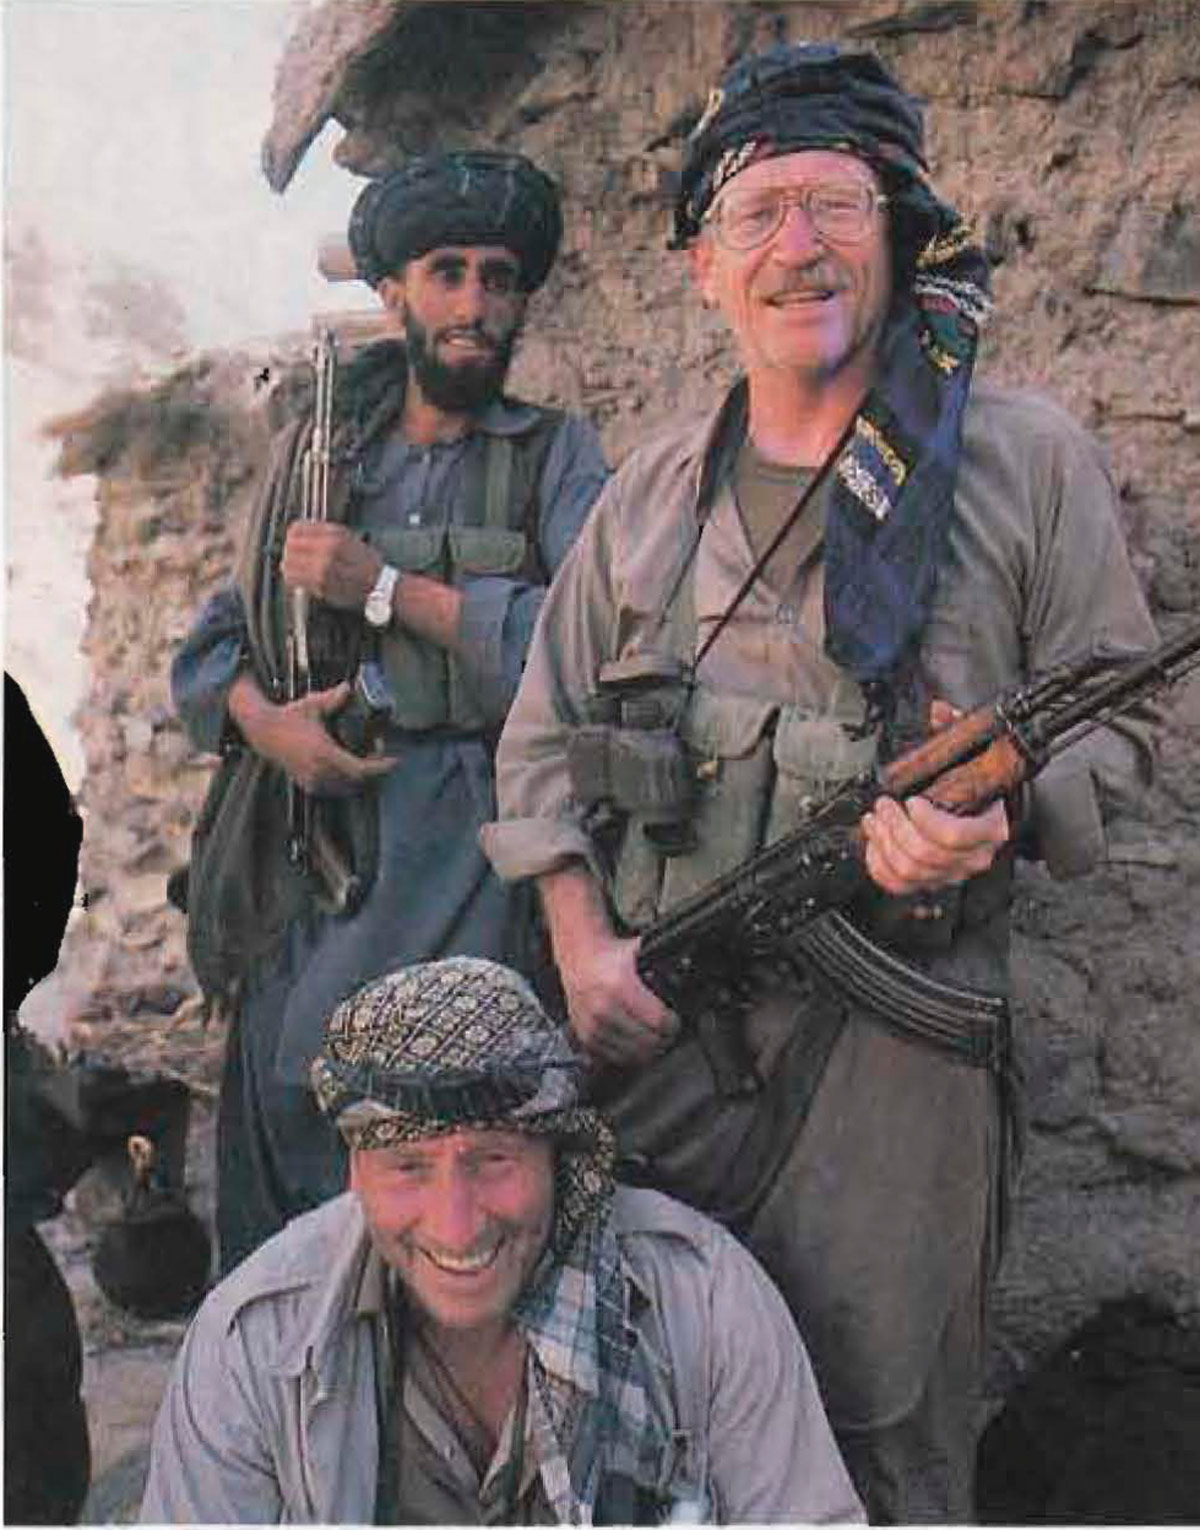 LTC Robert K. Brown in Afghanistan with an unidentified Afghan and a smiling MAJ Mike Williams. Mike joined Special Forces when it was formed, fought with UNPIK in Korea, and went on to serve as a major in three armies, U.S., Rhodesia, and Mike Hoare’s 5 Commando in the Congo. (Photo courtesy RKB Collection)